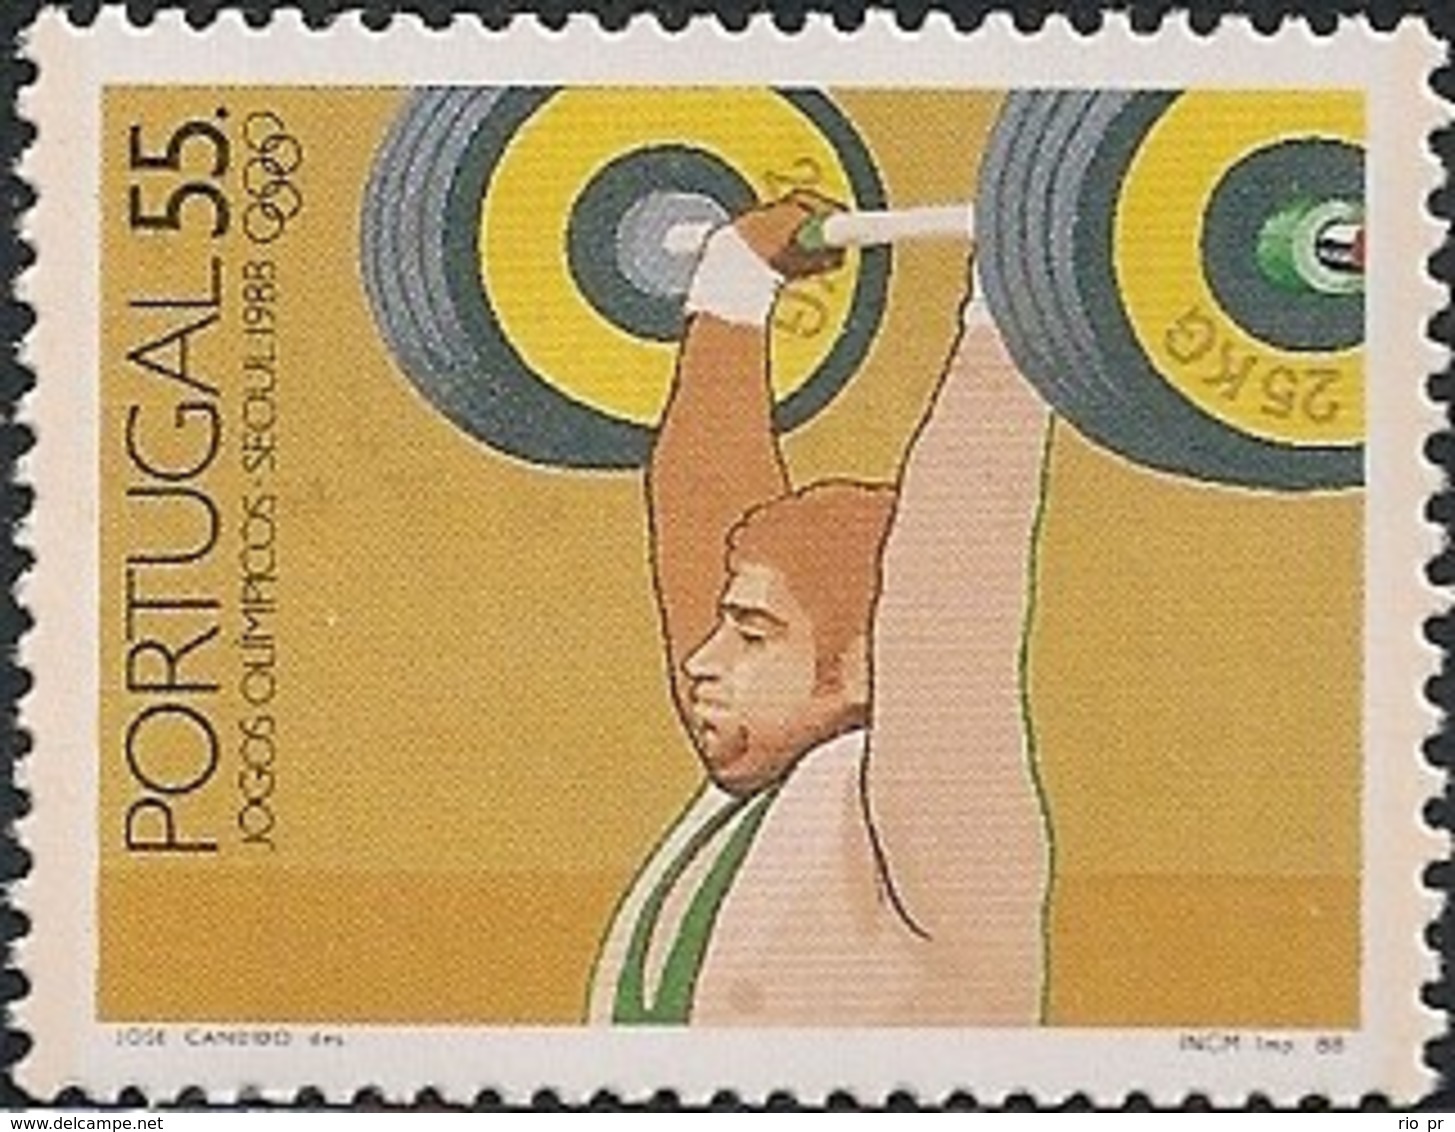 PORTUGAL - SEOUL'88 SUMMER OLYMPIC GAMES (WEIGHTLIFTING) 1988 - MNH - Zomer 1988: Seoel